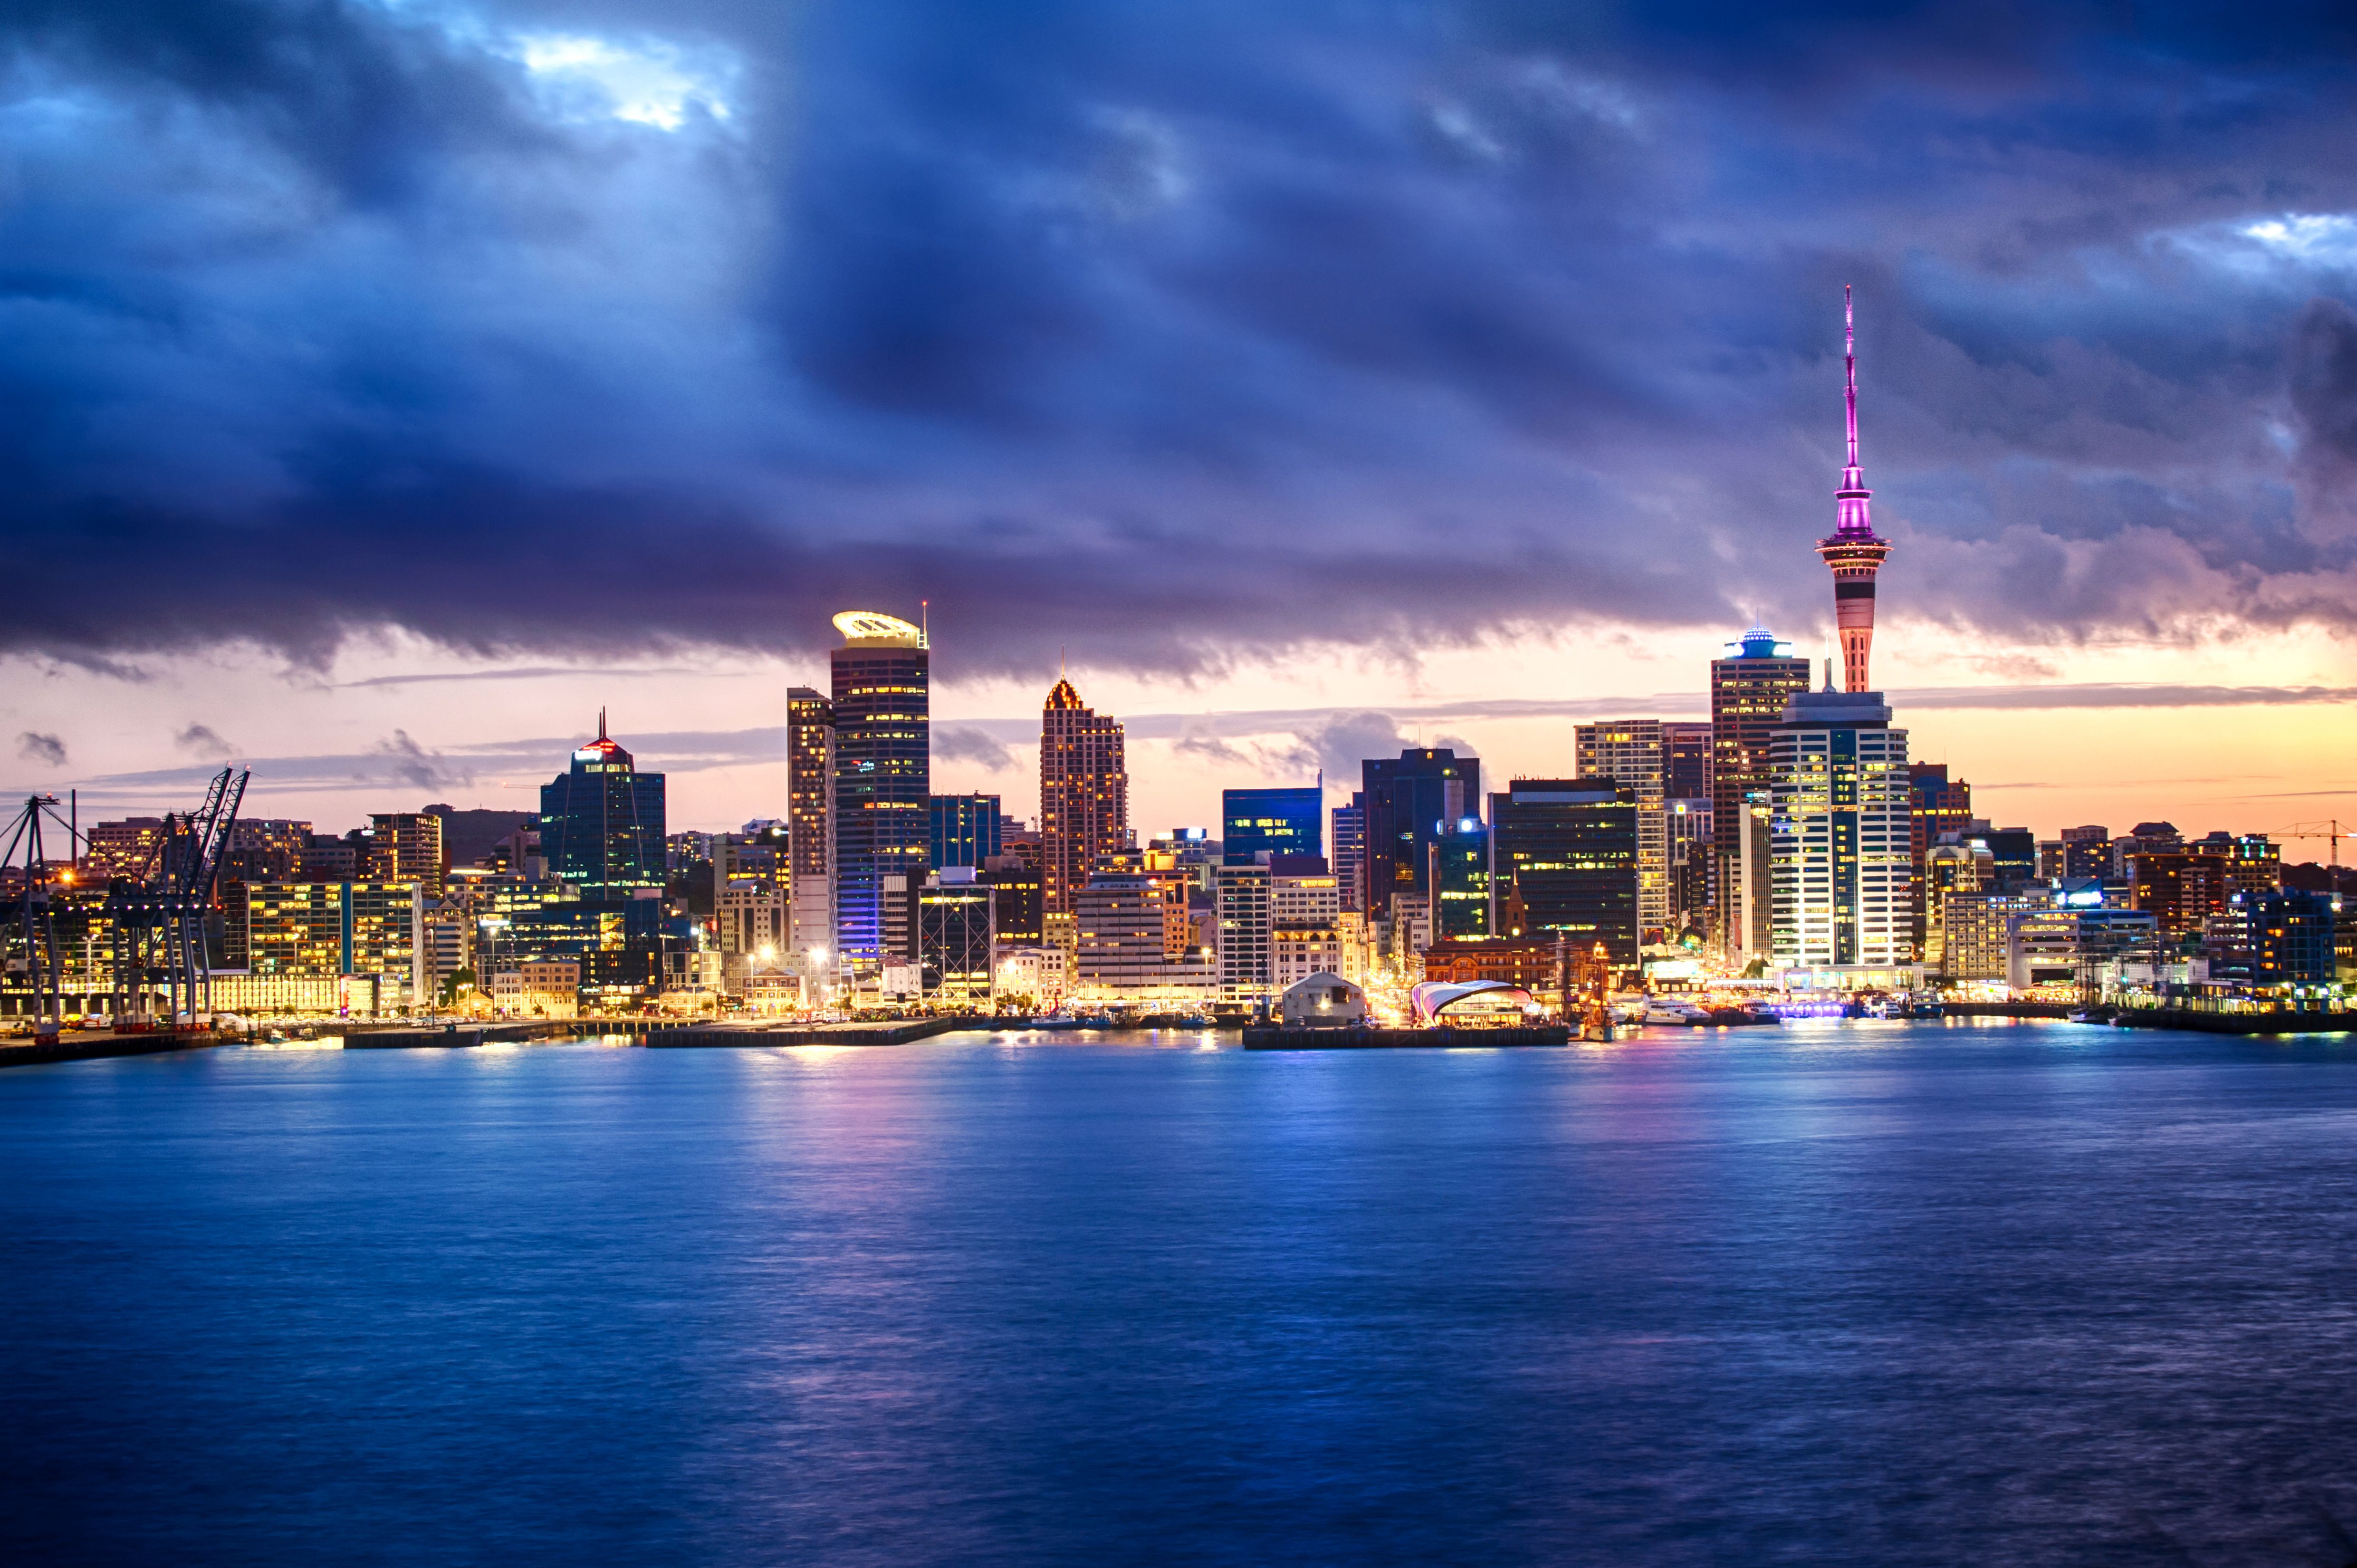 Auckland 4k Ultra HD Wallpapers and Backgrounds Image